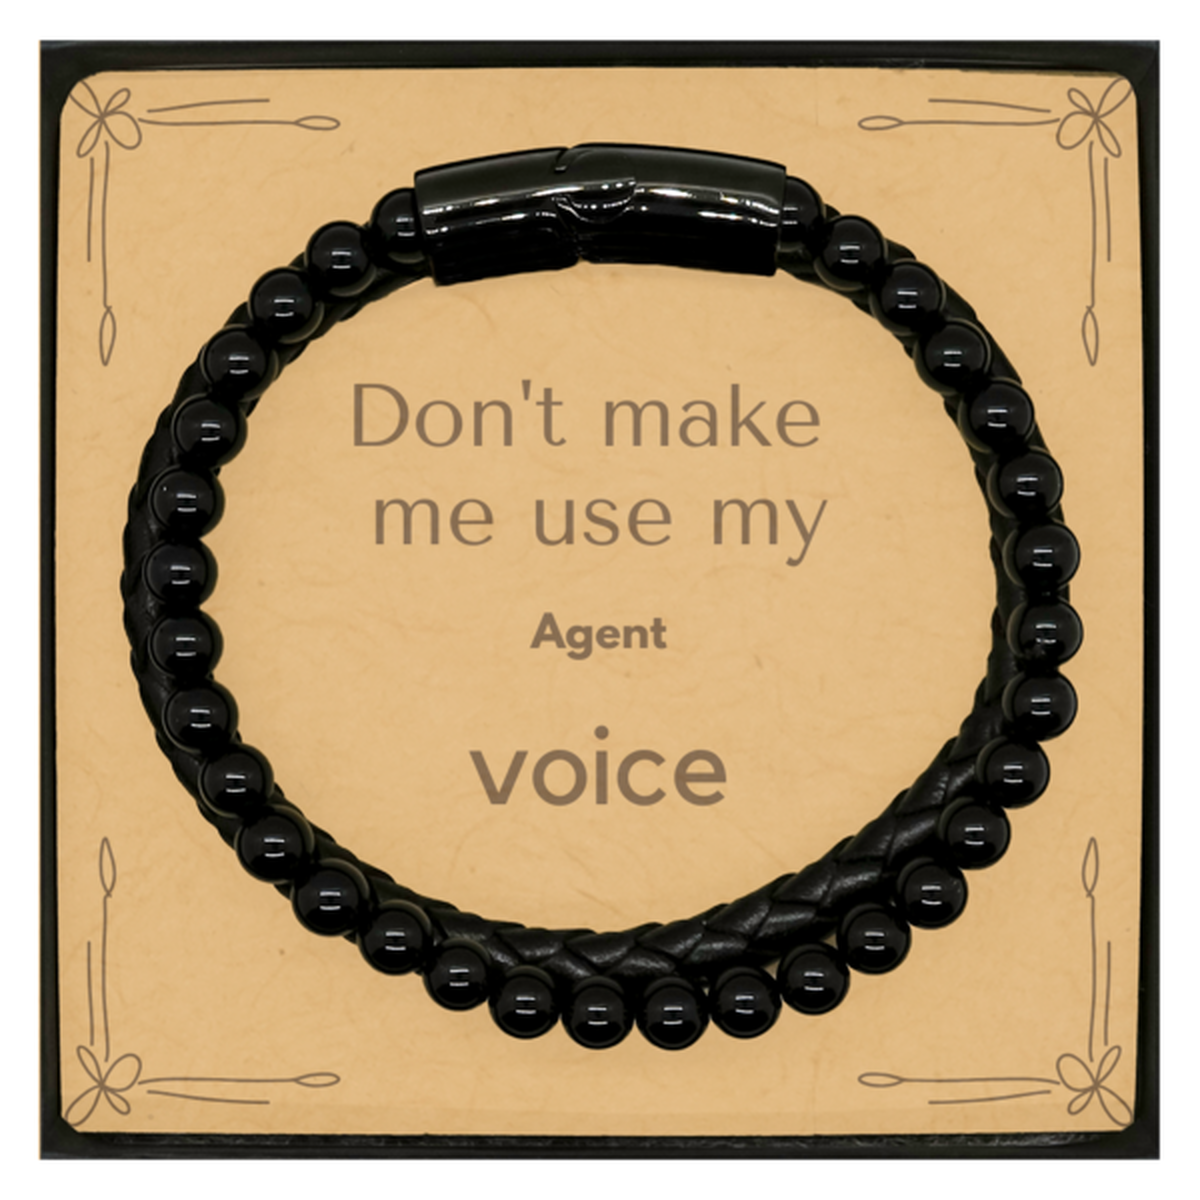 Don't make me use my Agent voice, Sarcasm Agent Card Gifts, Christmas Agent Stone Leather Bracelets Birthday Unique Gifts For Agent Coworkers, Men, Women, Colleague, Friends